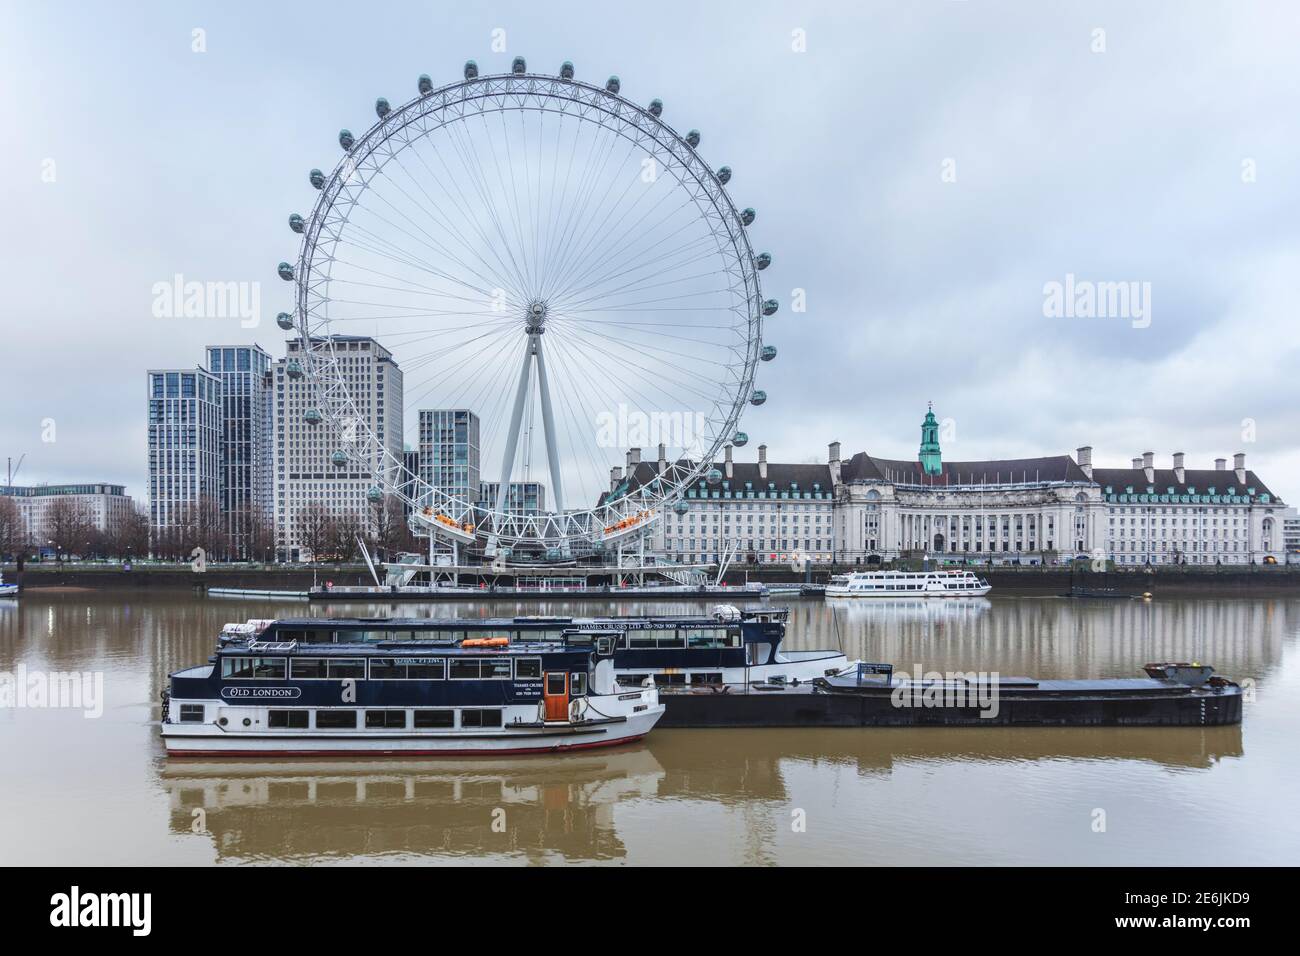 The River Thames, London Eye viewing wheel, county Hall building (London Aquarium) shell building and tour boats, Westminster, London Stock Photo